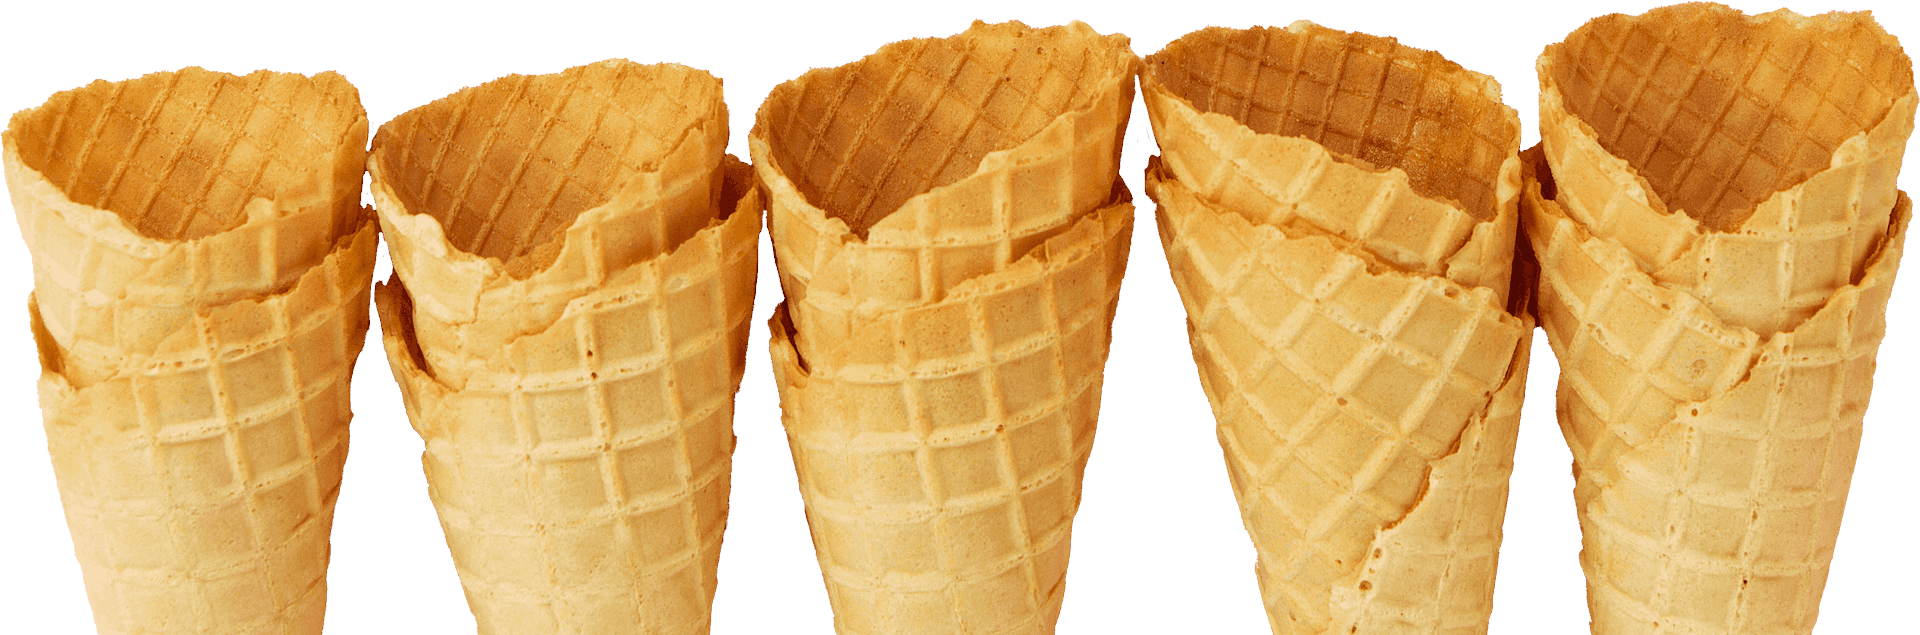 Three cones of different sizes are lined up.